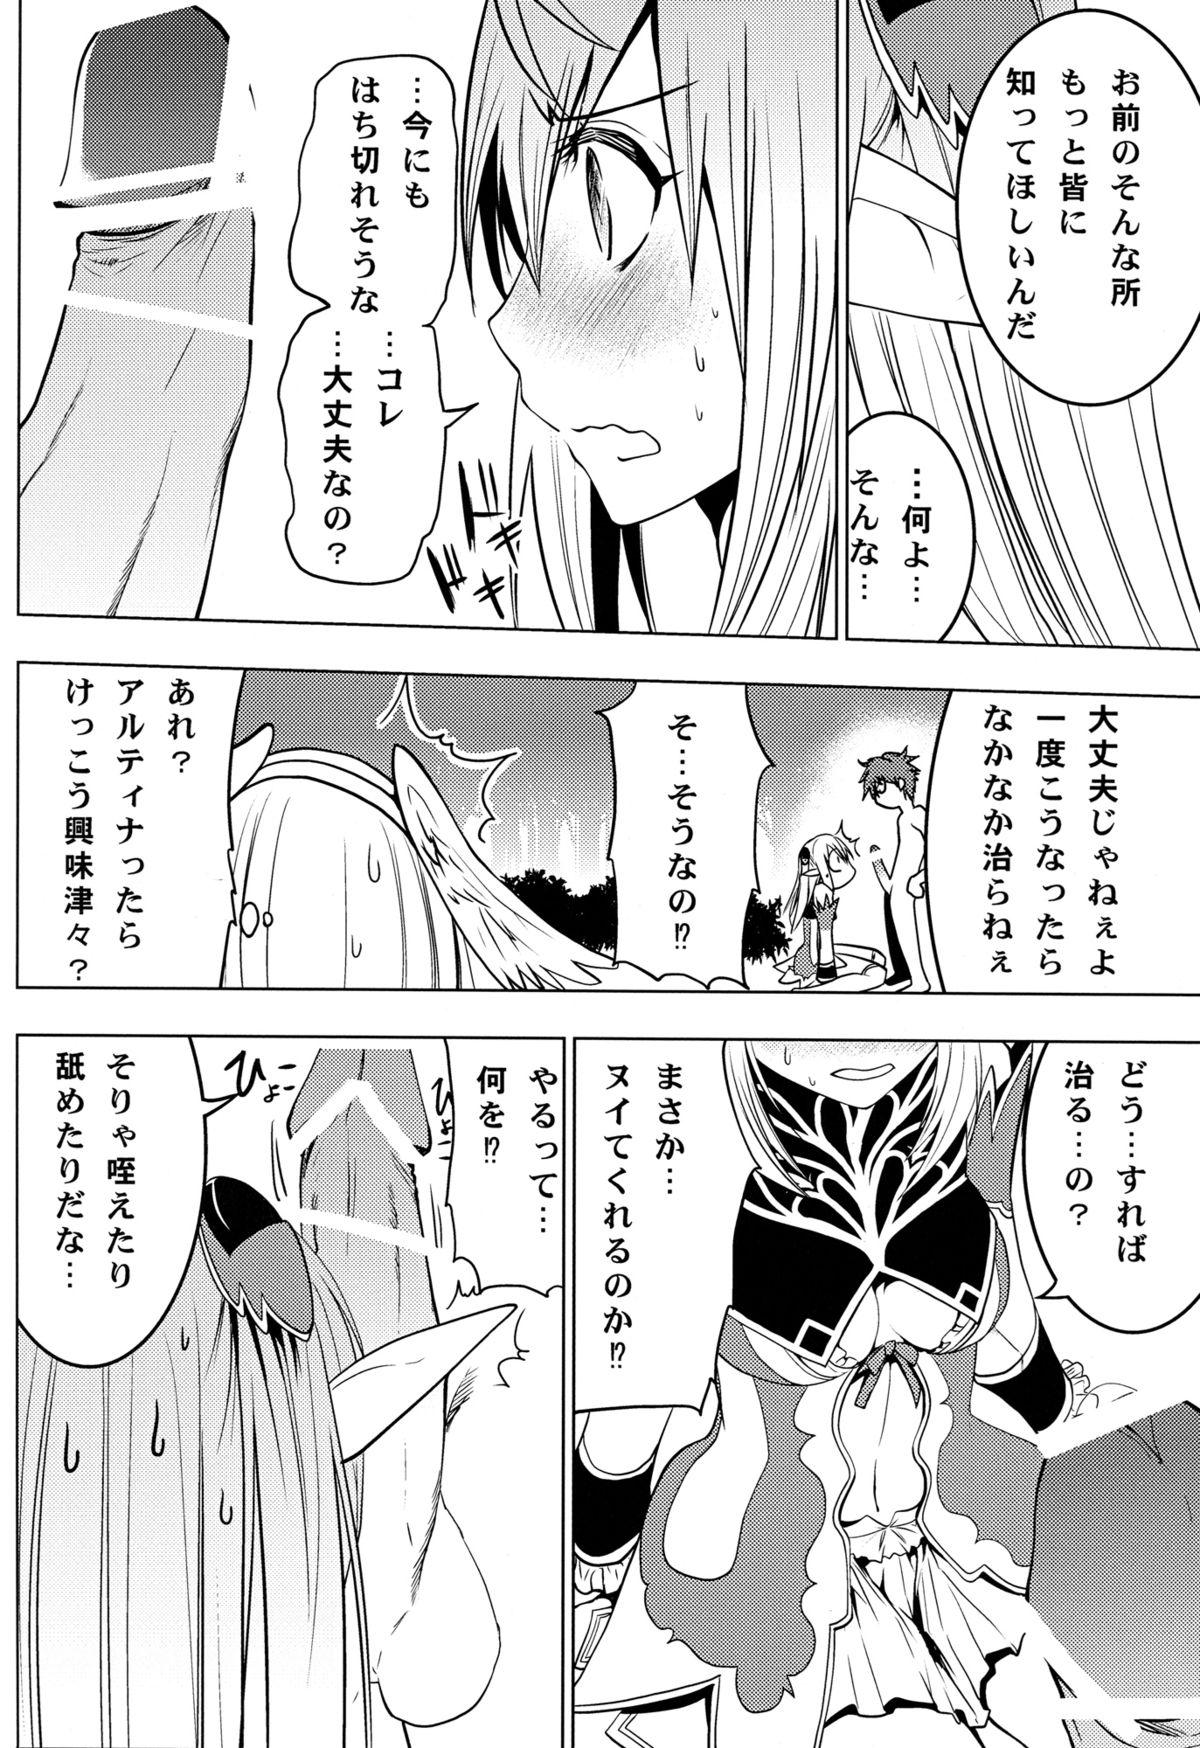 Jerking Off Altina Weapon - Shining blade Trio - Page 10